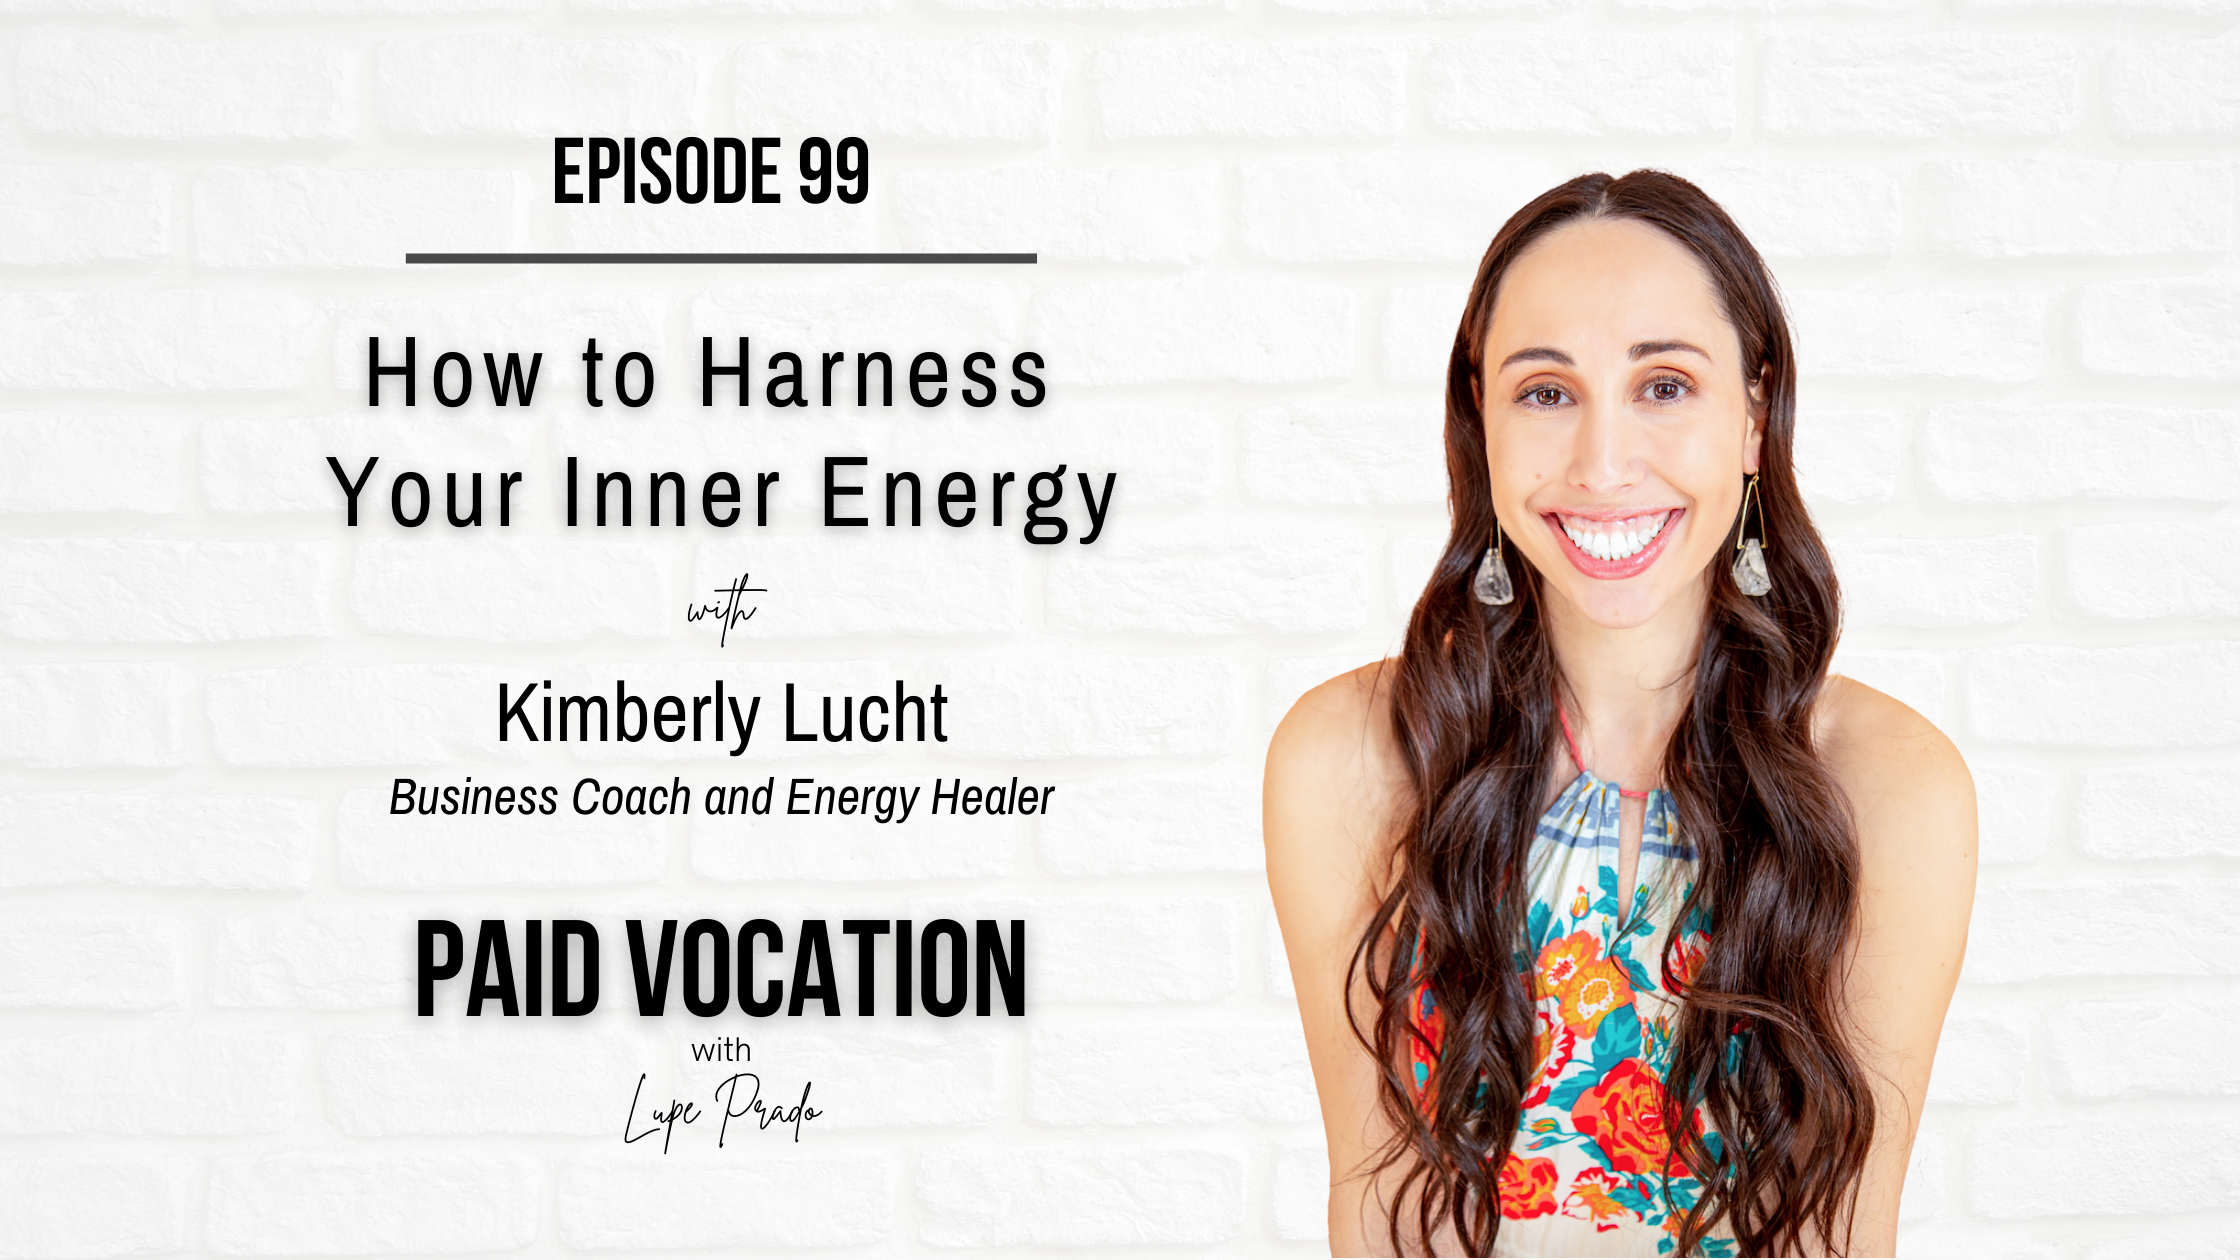 How to Harness Your Inner Energy with Kimberly Lucht